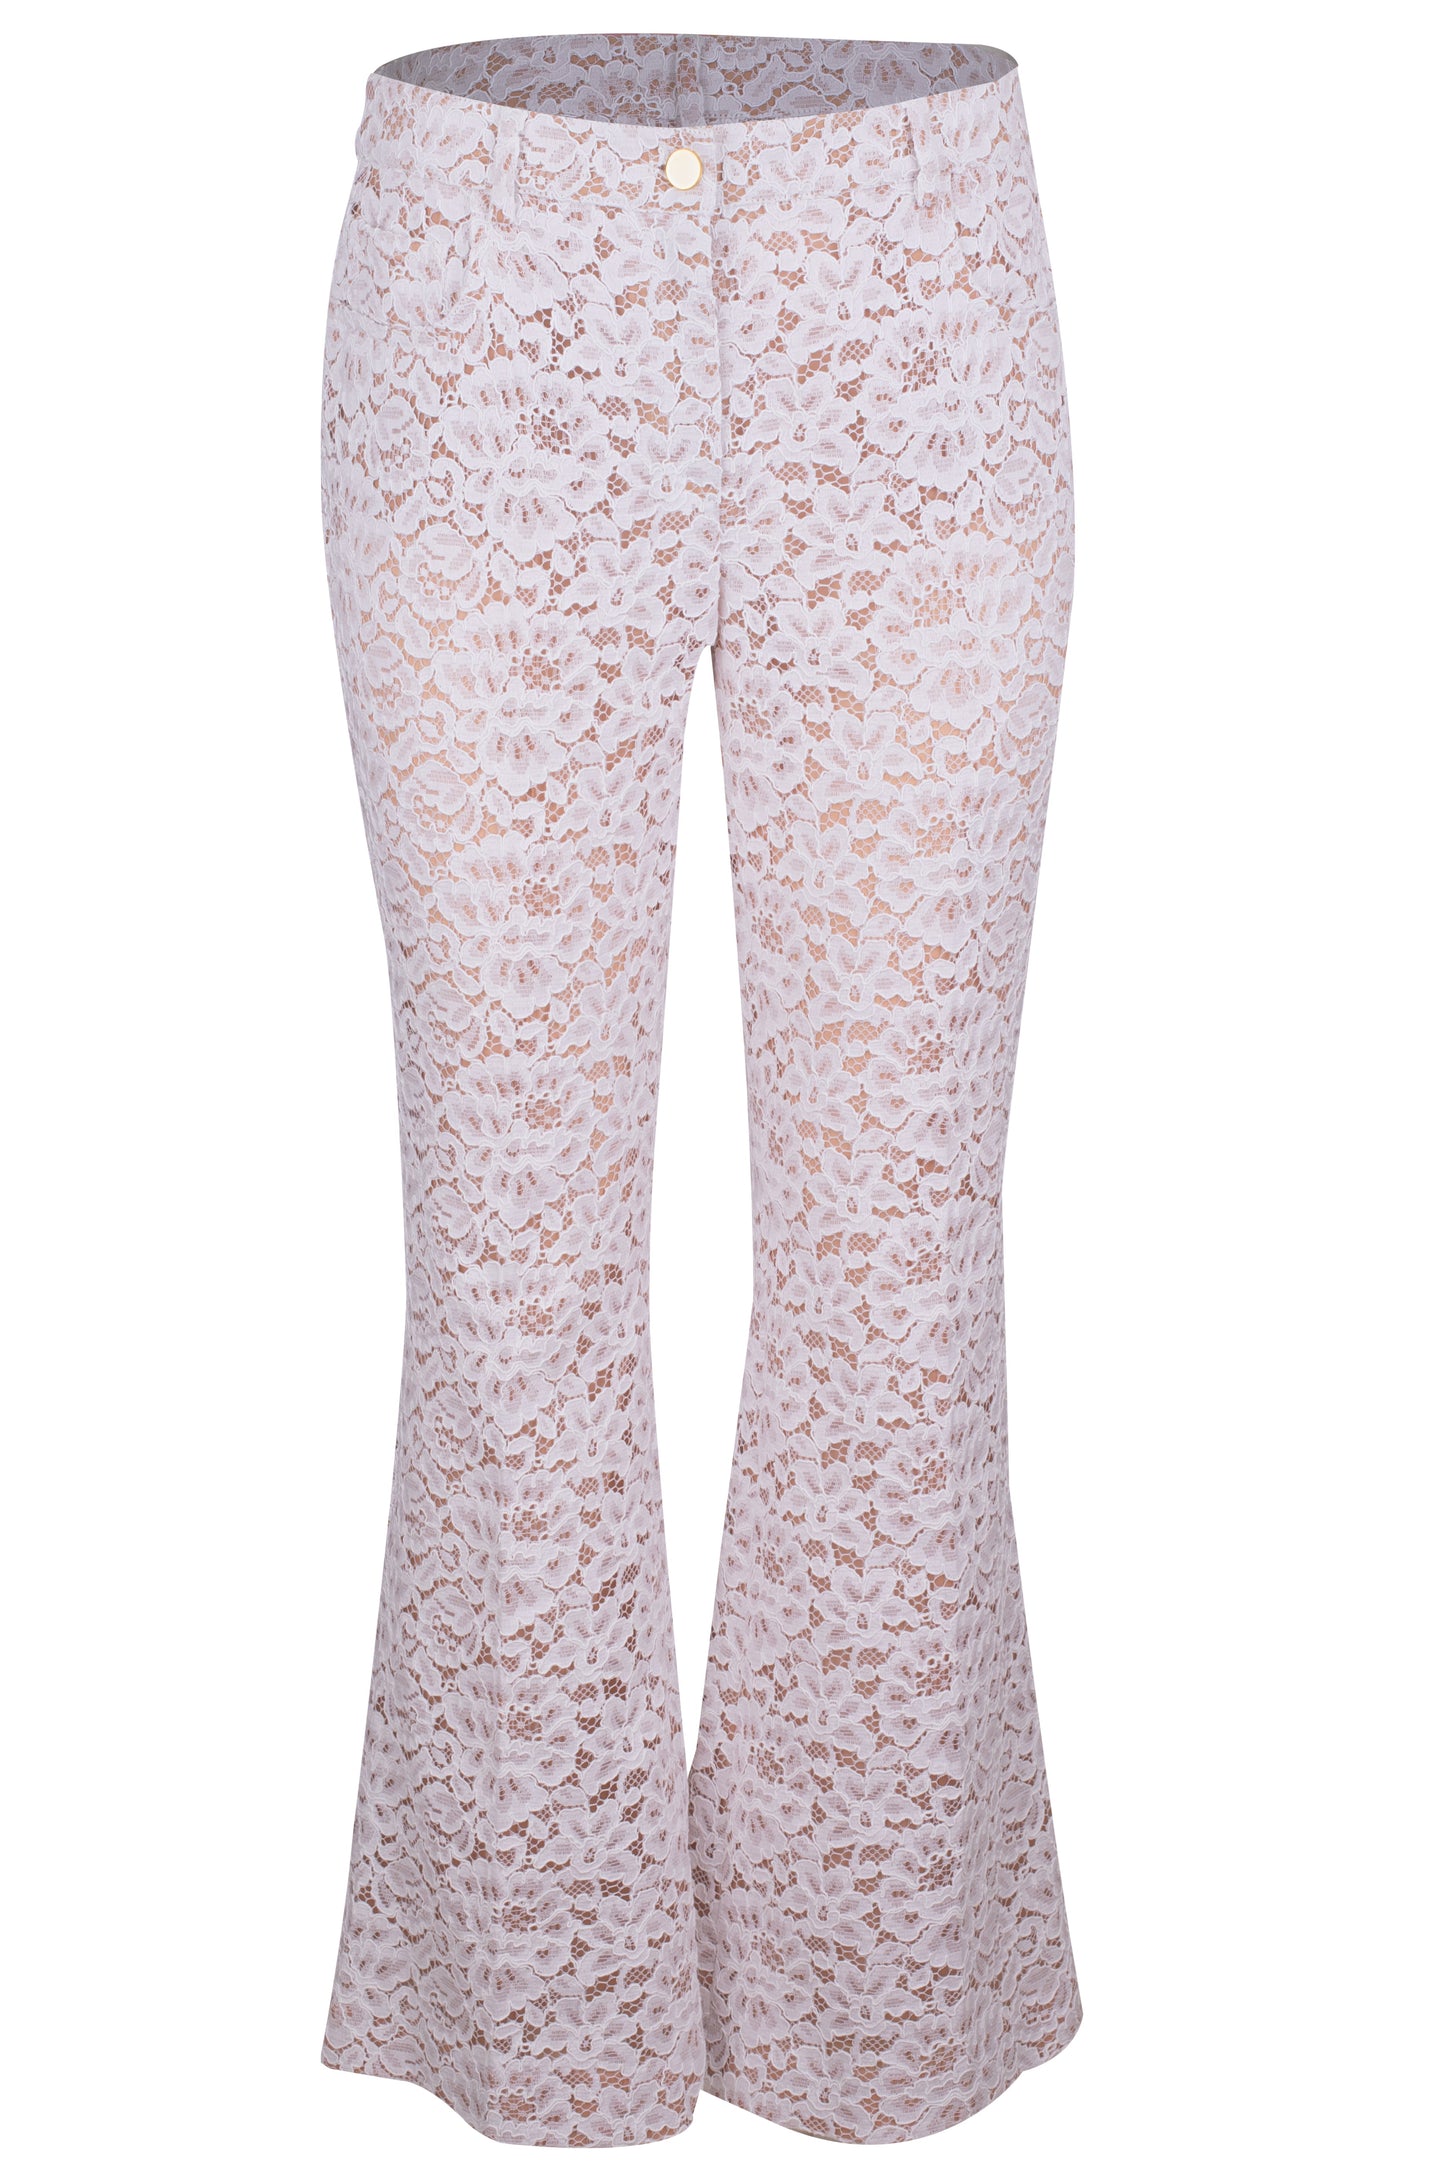 MICHAEL KORS-Floral Cropped Flare Jeans-